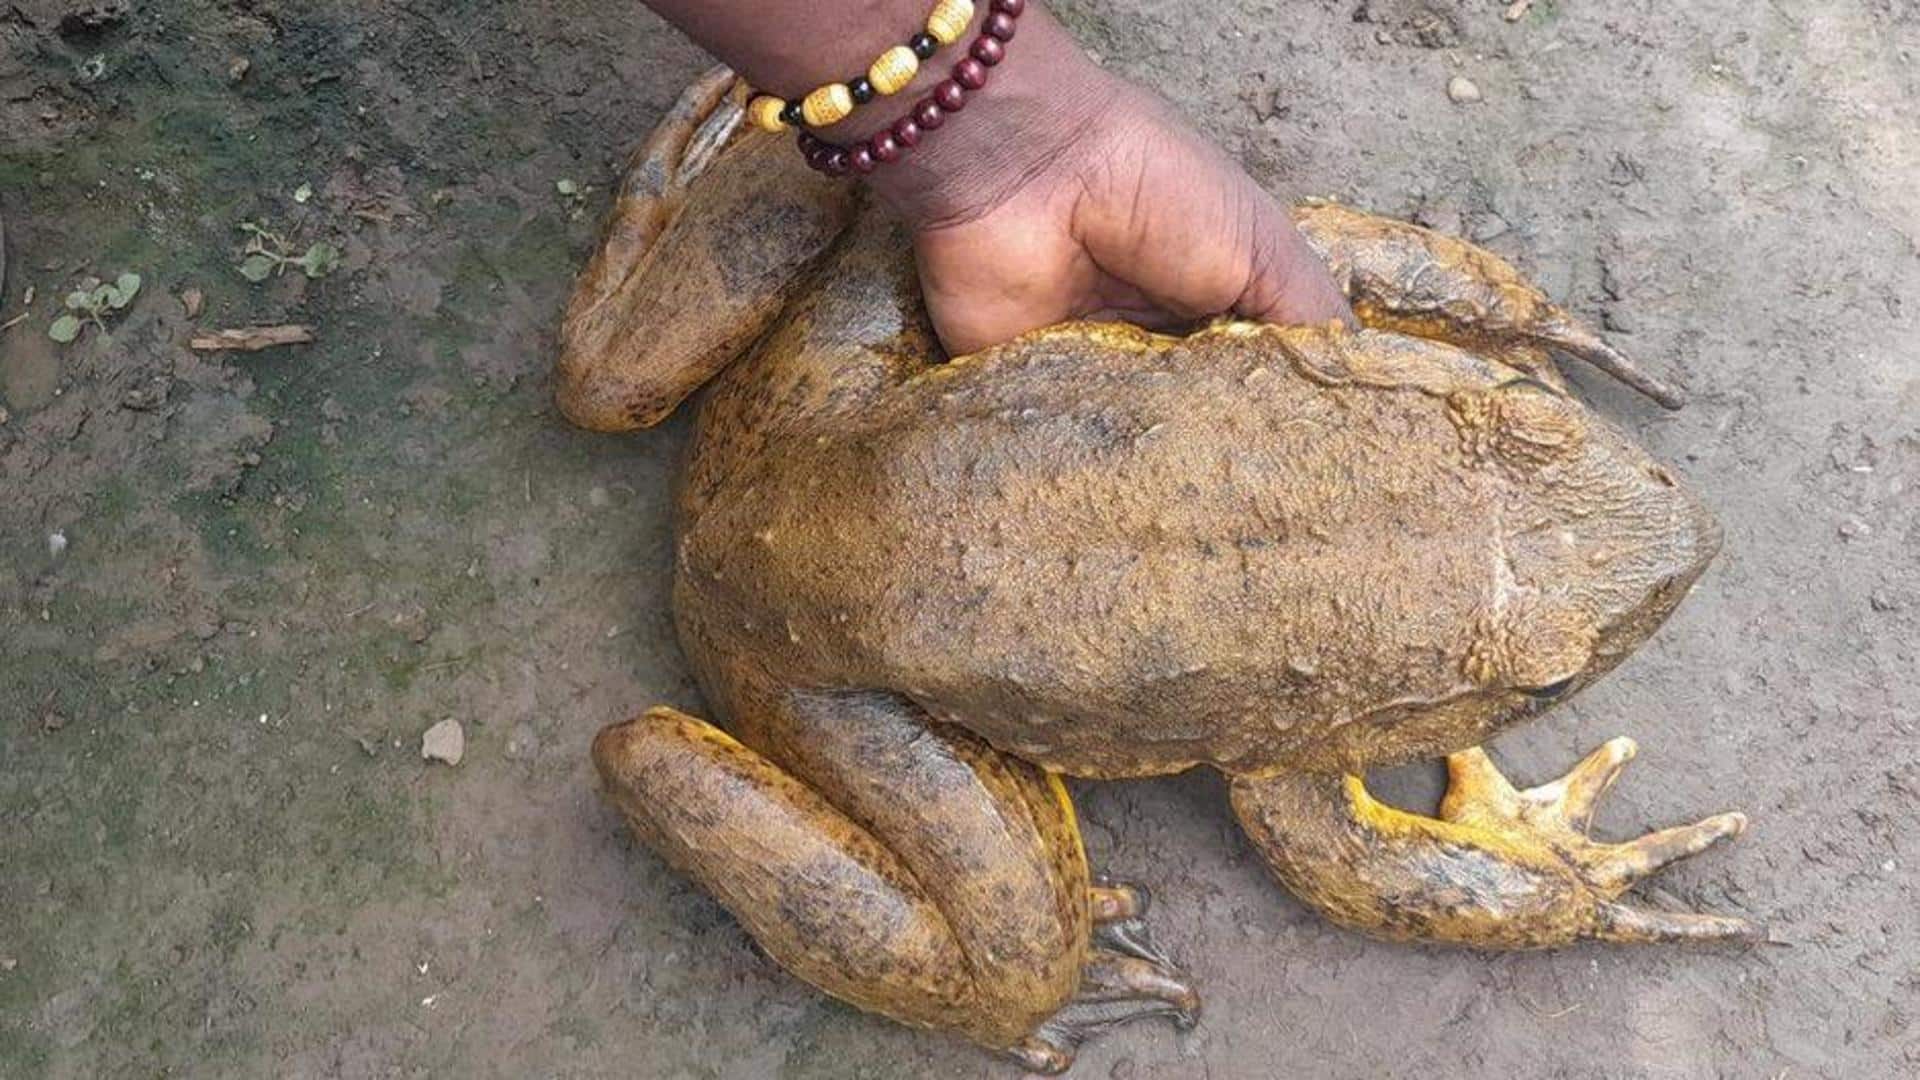 This man is on mission to save world's biggest frog